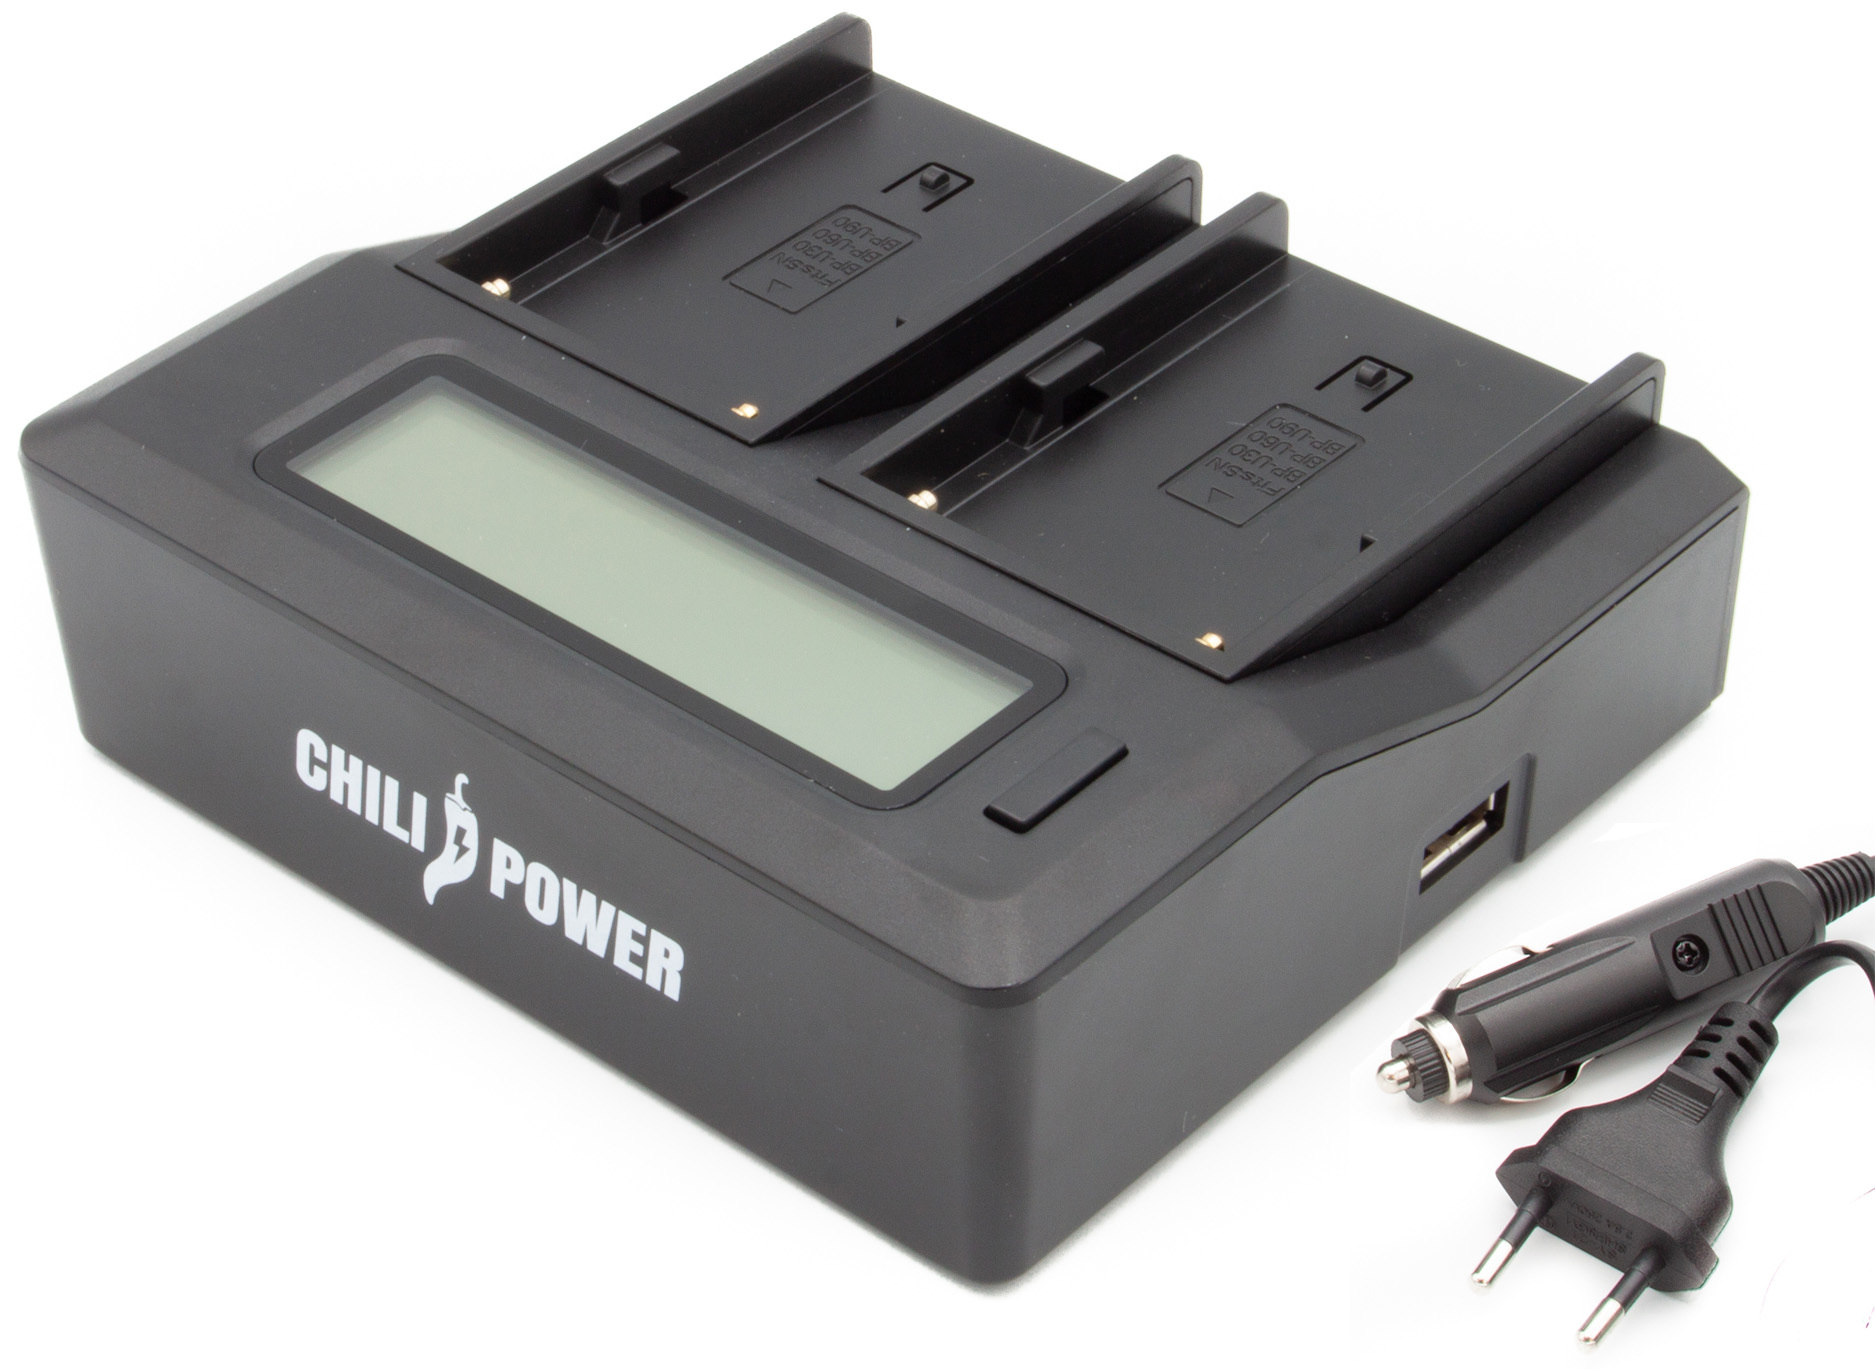 ChiliPower Duo oplader voor 2 camera-accu's Sony NP-FH50, NP-FV50, NP-FP50 - met LCD scherm Duo oplader voor 2 camera-accu's Sony NP-FH50, NP-FV50, NP-FP50 - met LCD scherm